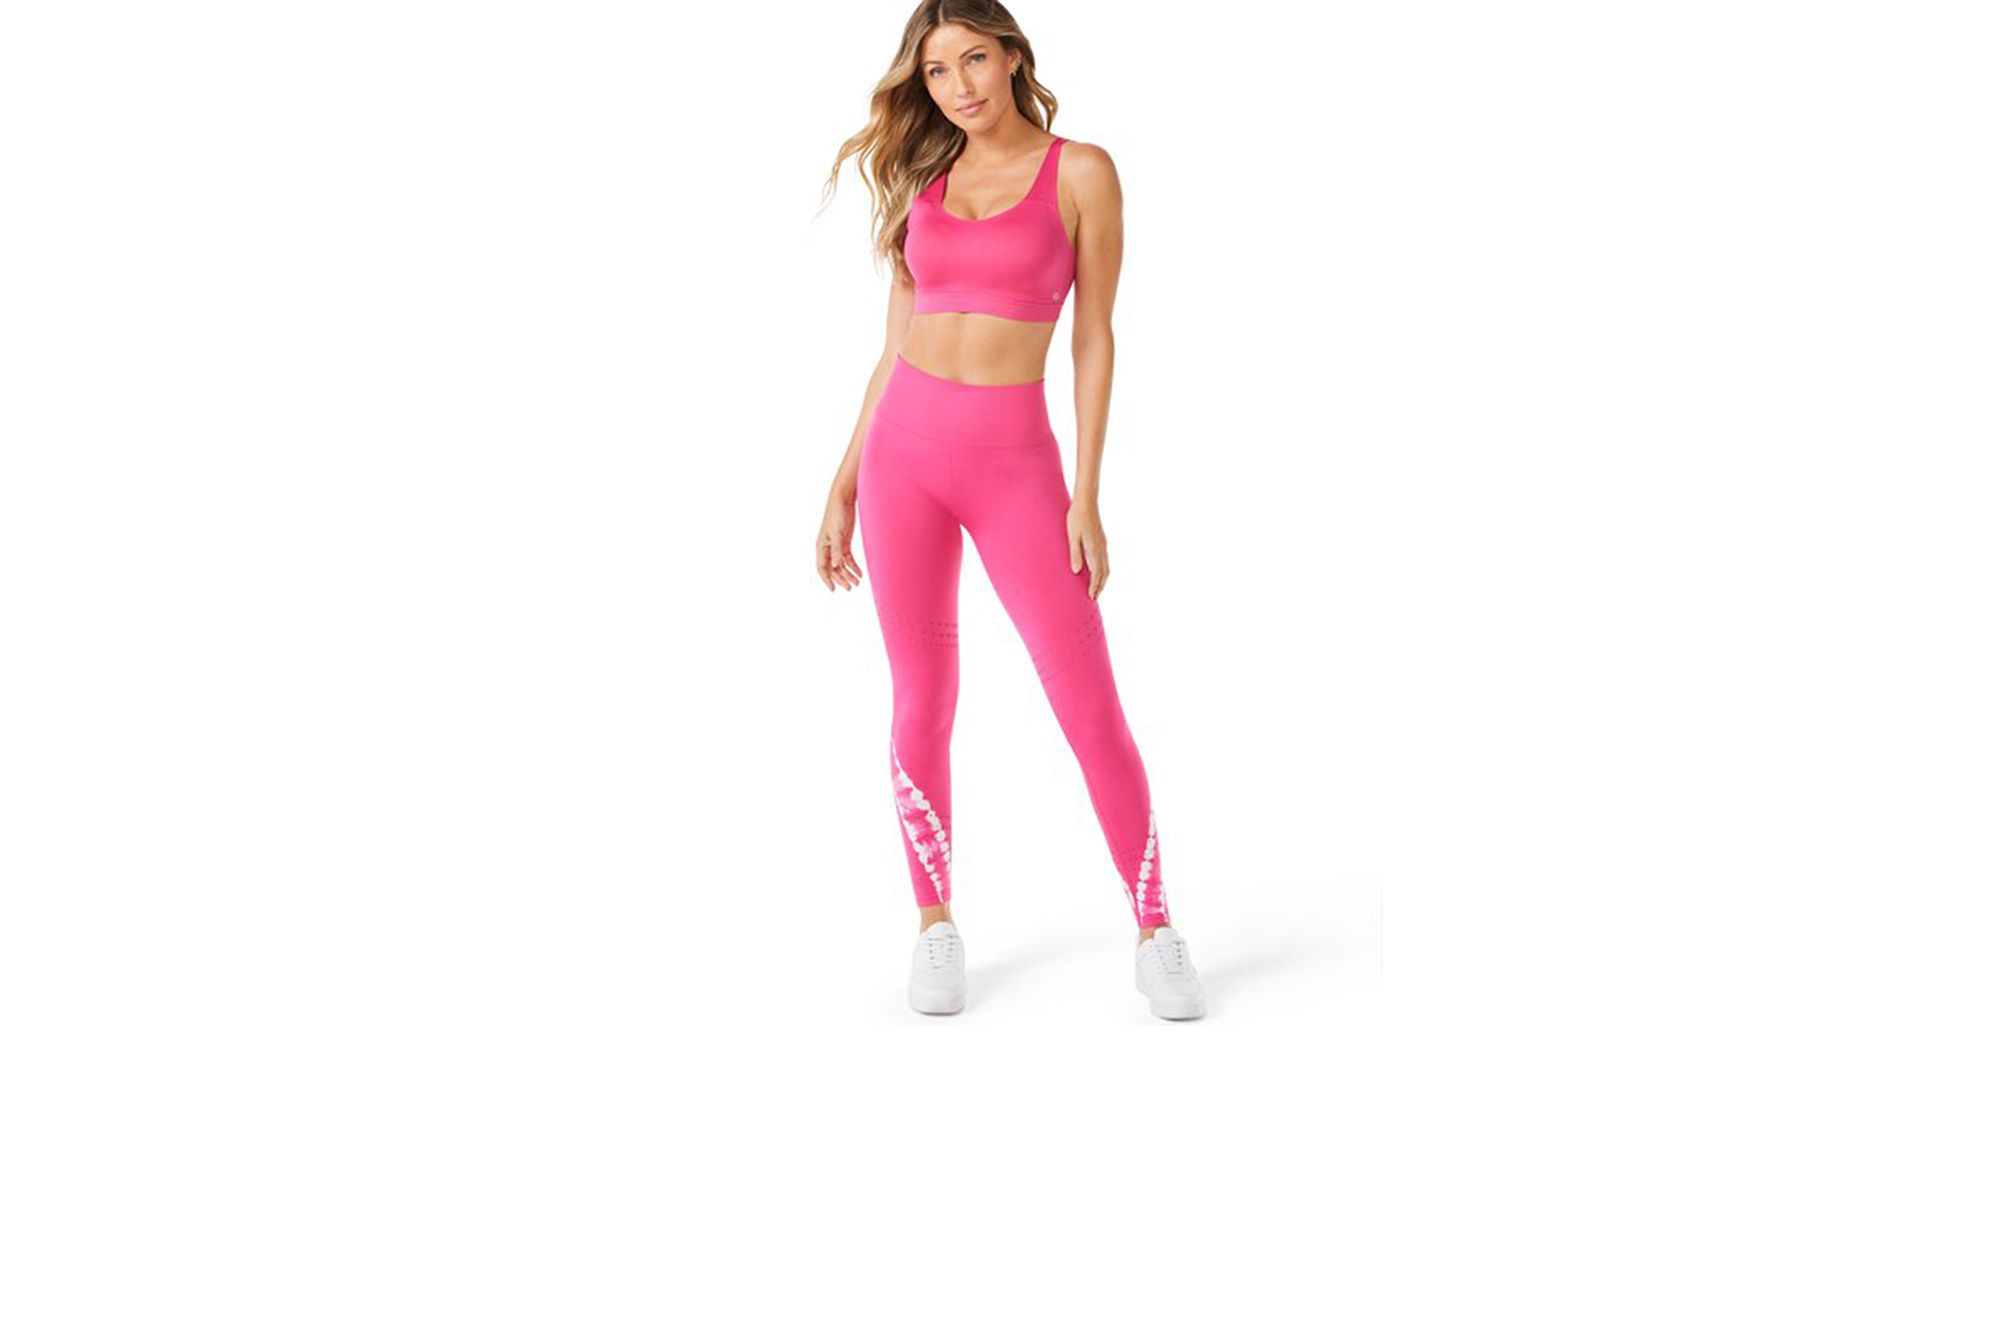 These Seamless Leggings From Sofia Vergara Active Are Only $11